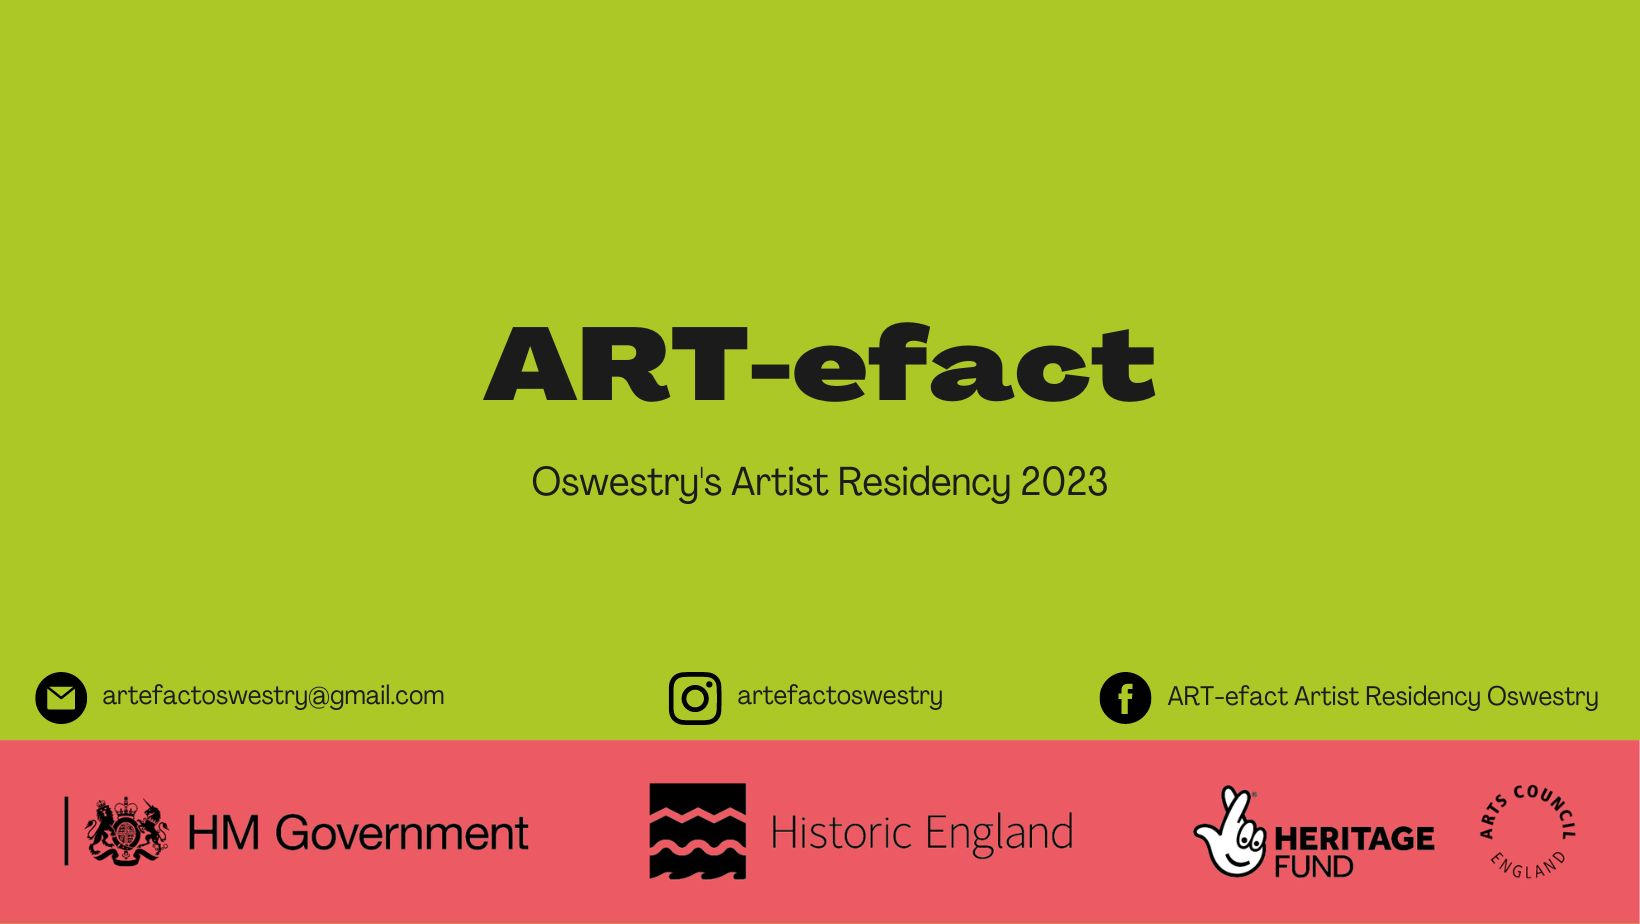 News from our partners: ART-efact residency – Oswestry’s Summer of Art 2023 centrepiece – Shropshire Council Newsroom